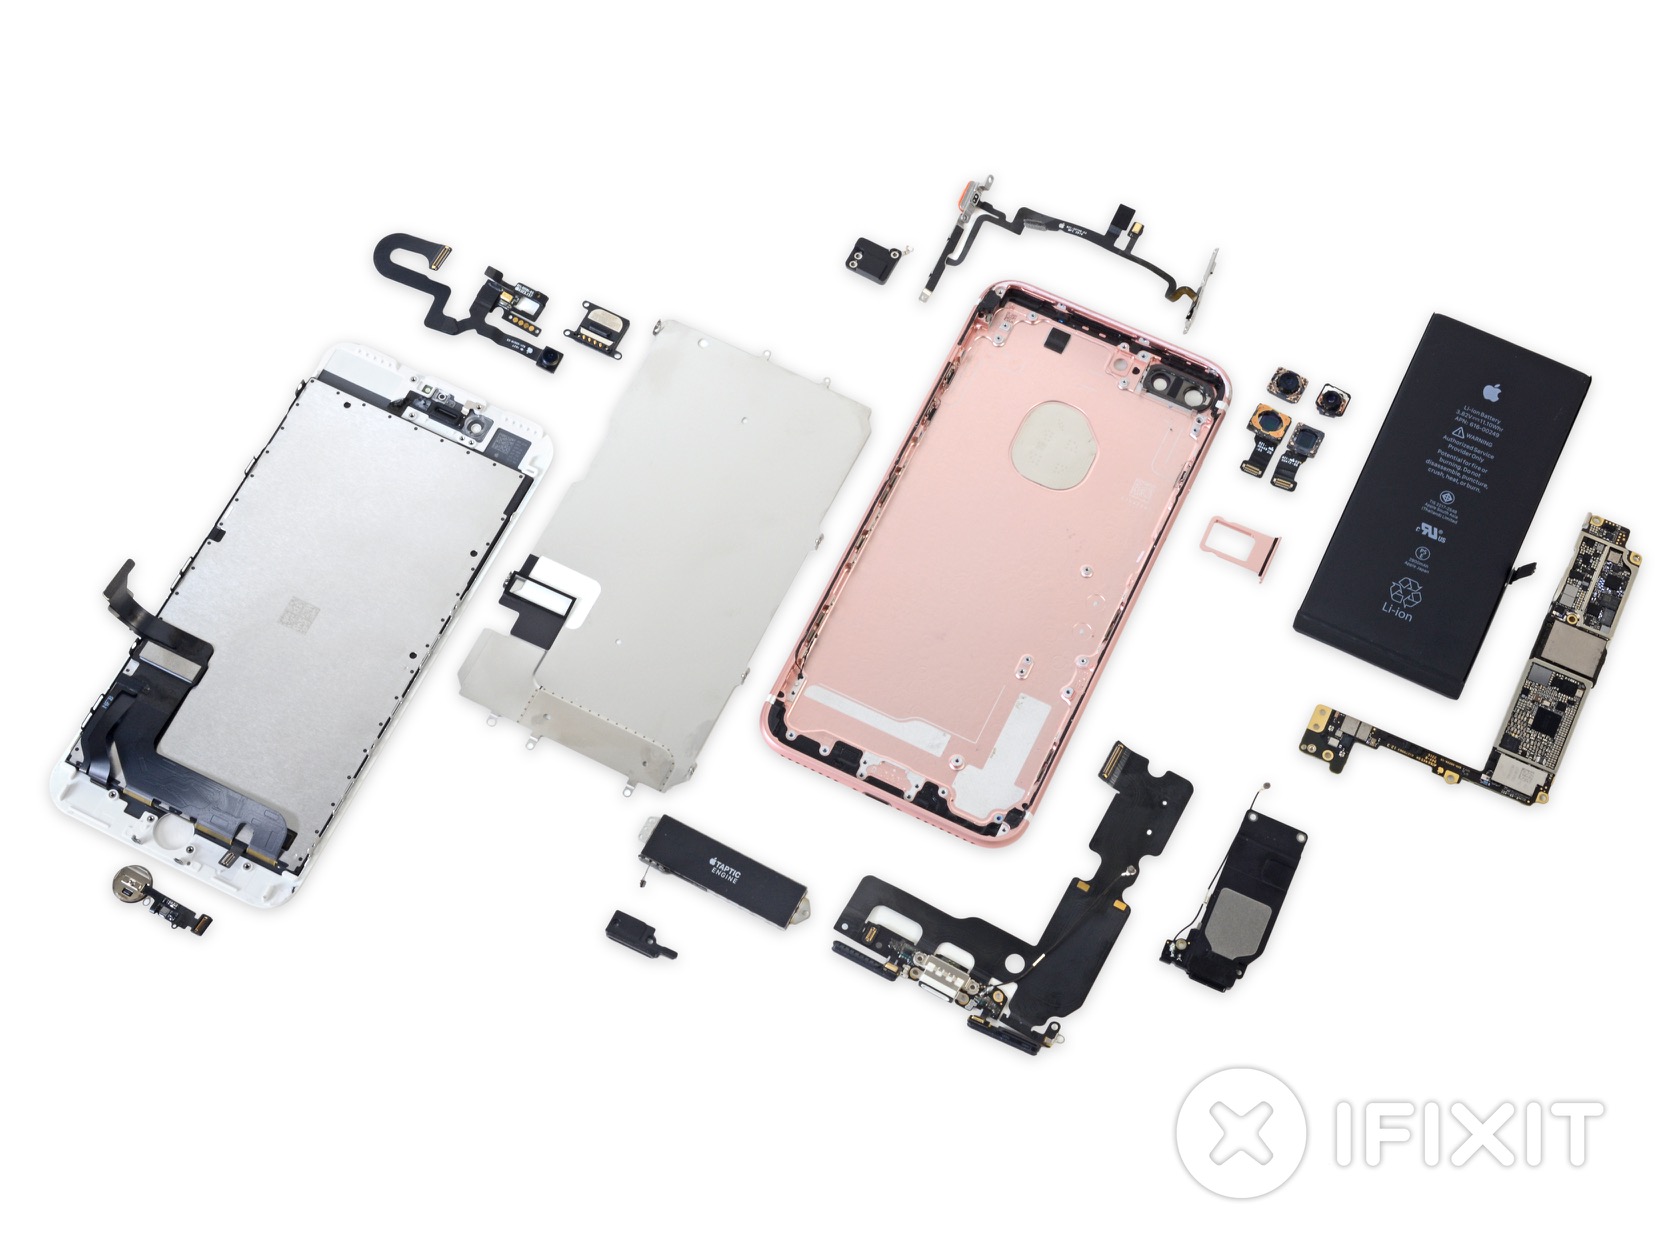 IPhone 7 Plus Disassembly by iFixit